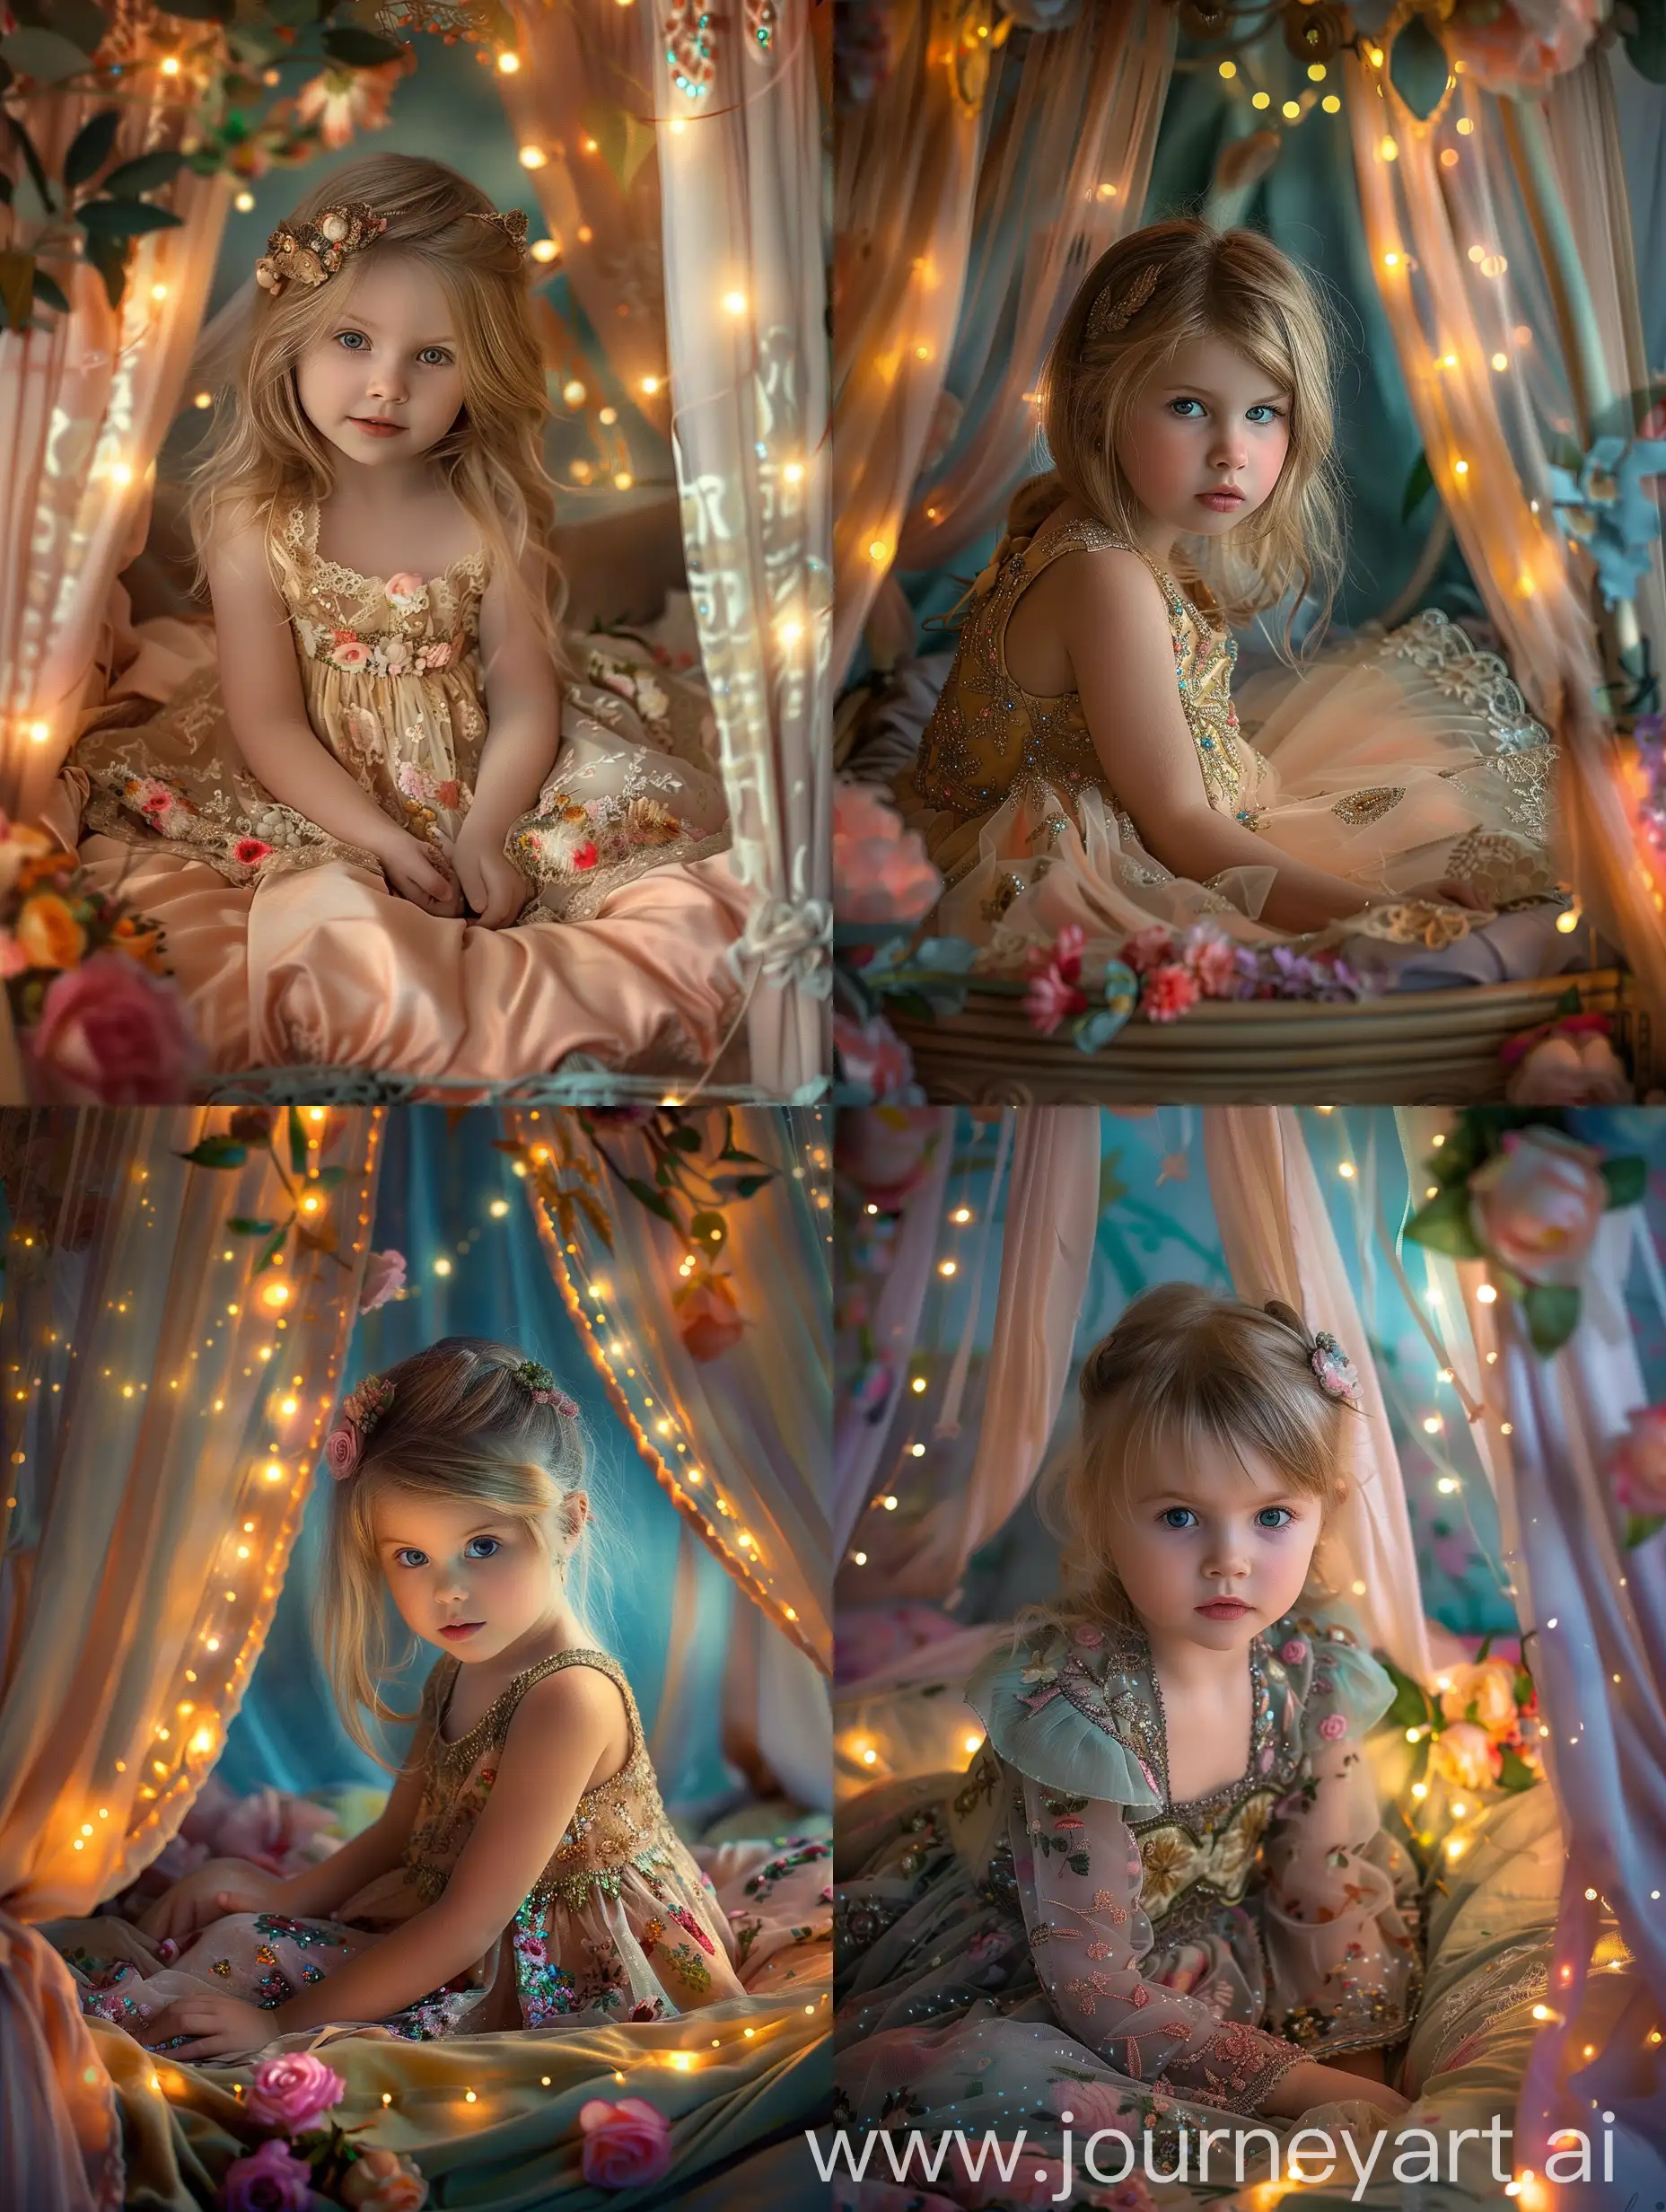 Little girl with blonde hair in a beautiful dress sitting on a canopy bed, canopy glows with lights, flowers on the bed, close-up, realistic photo, hyperrealism, face clearly visible, looking at the camera, colors of the bed, close-up photo, light photo